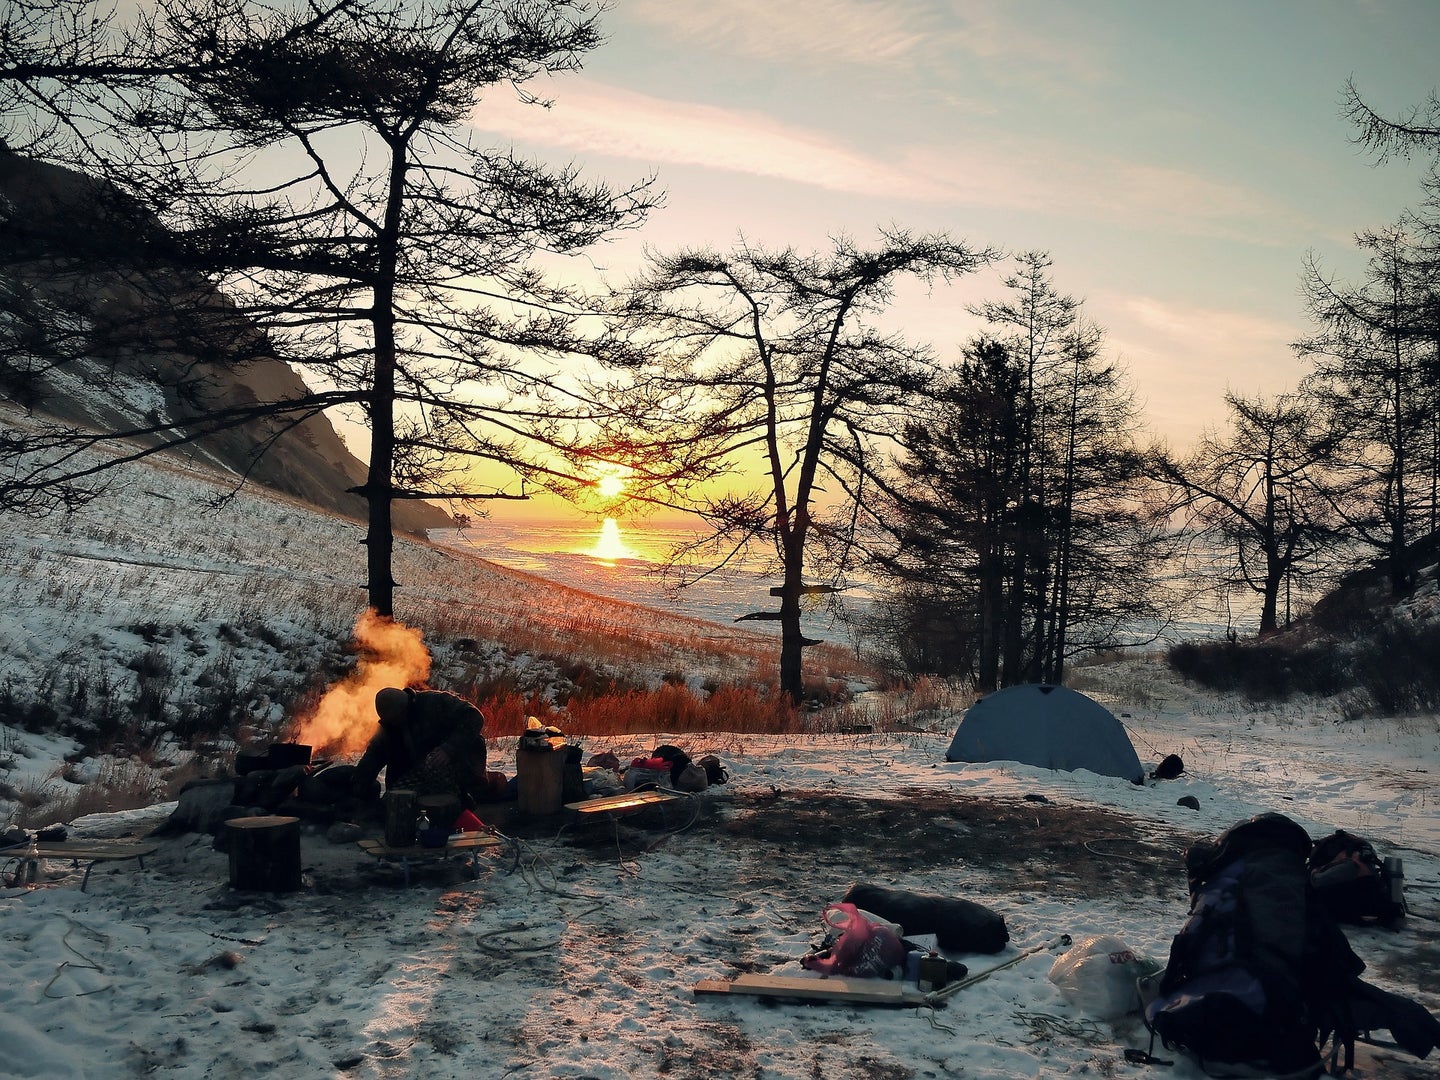 camp site in the winter